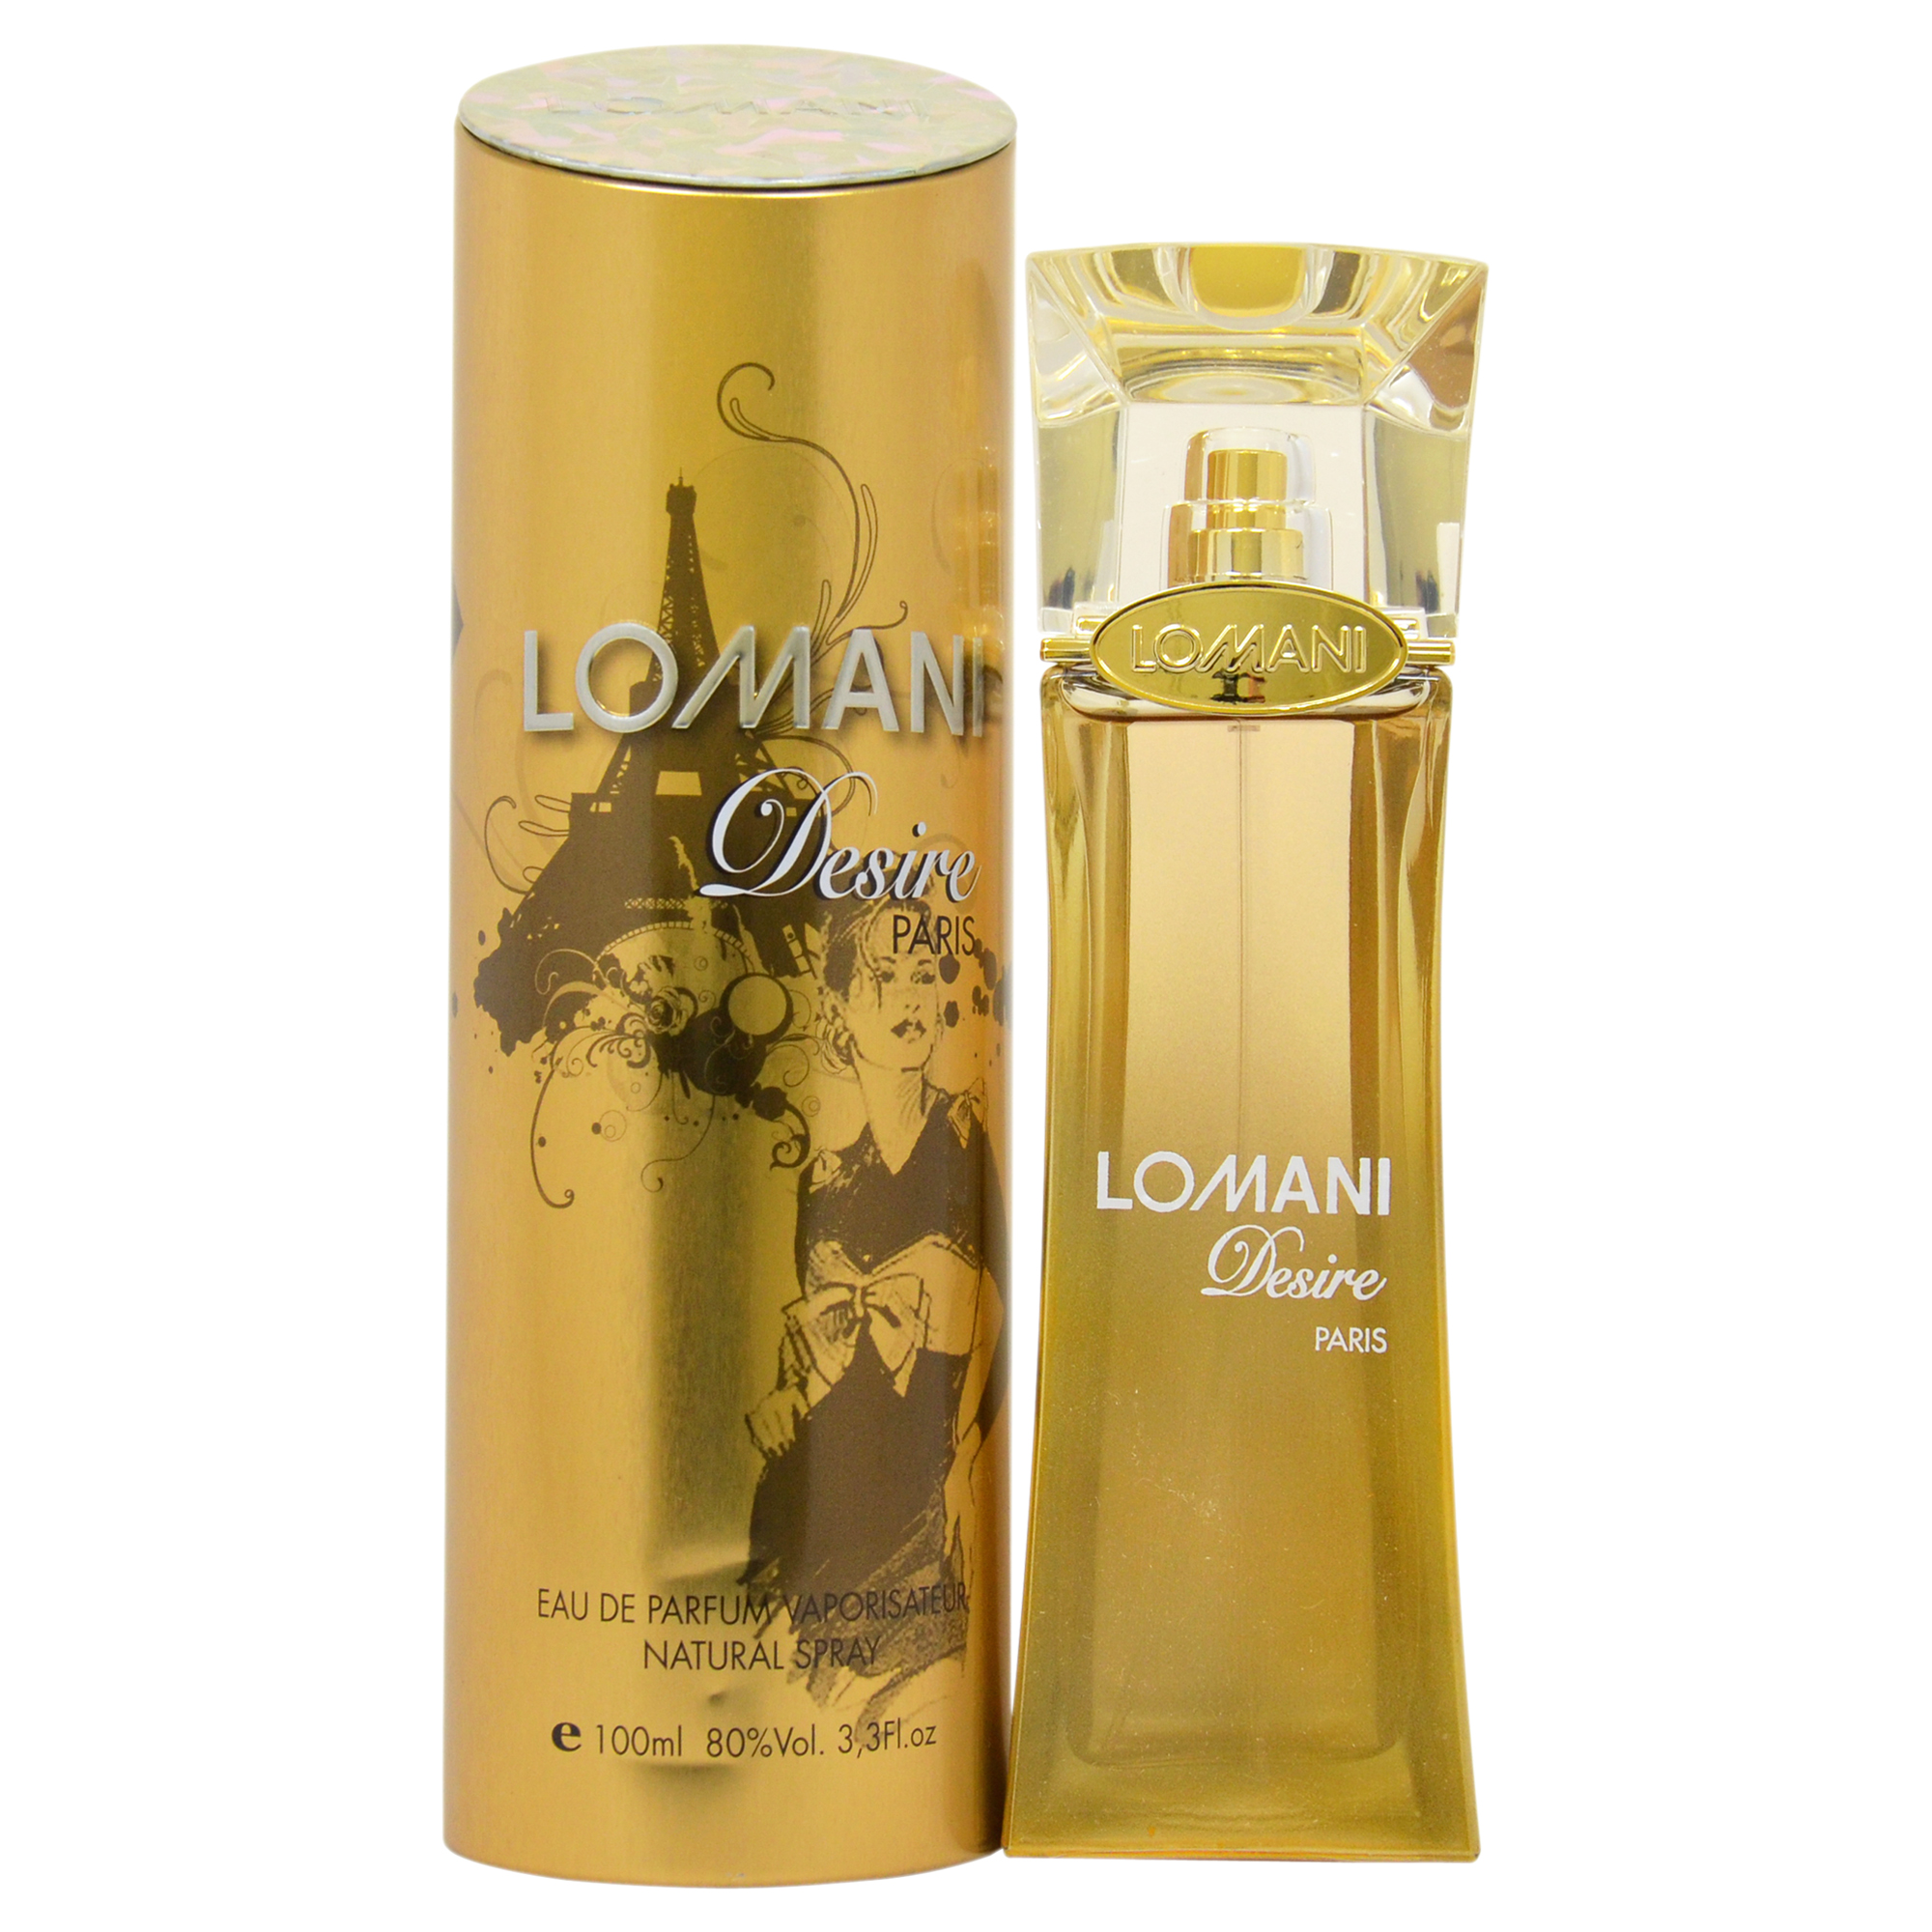 EAN 3610400000103 product image for Desire by Lomani for Women - 3.3 oz EDP Spray | upcitemdb.com